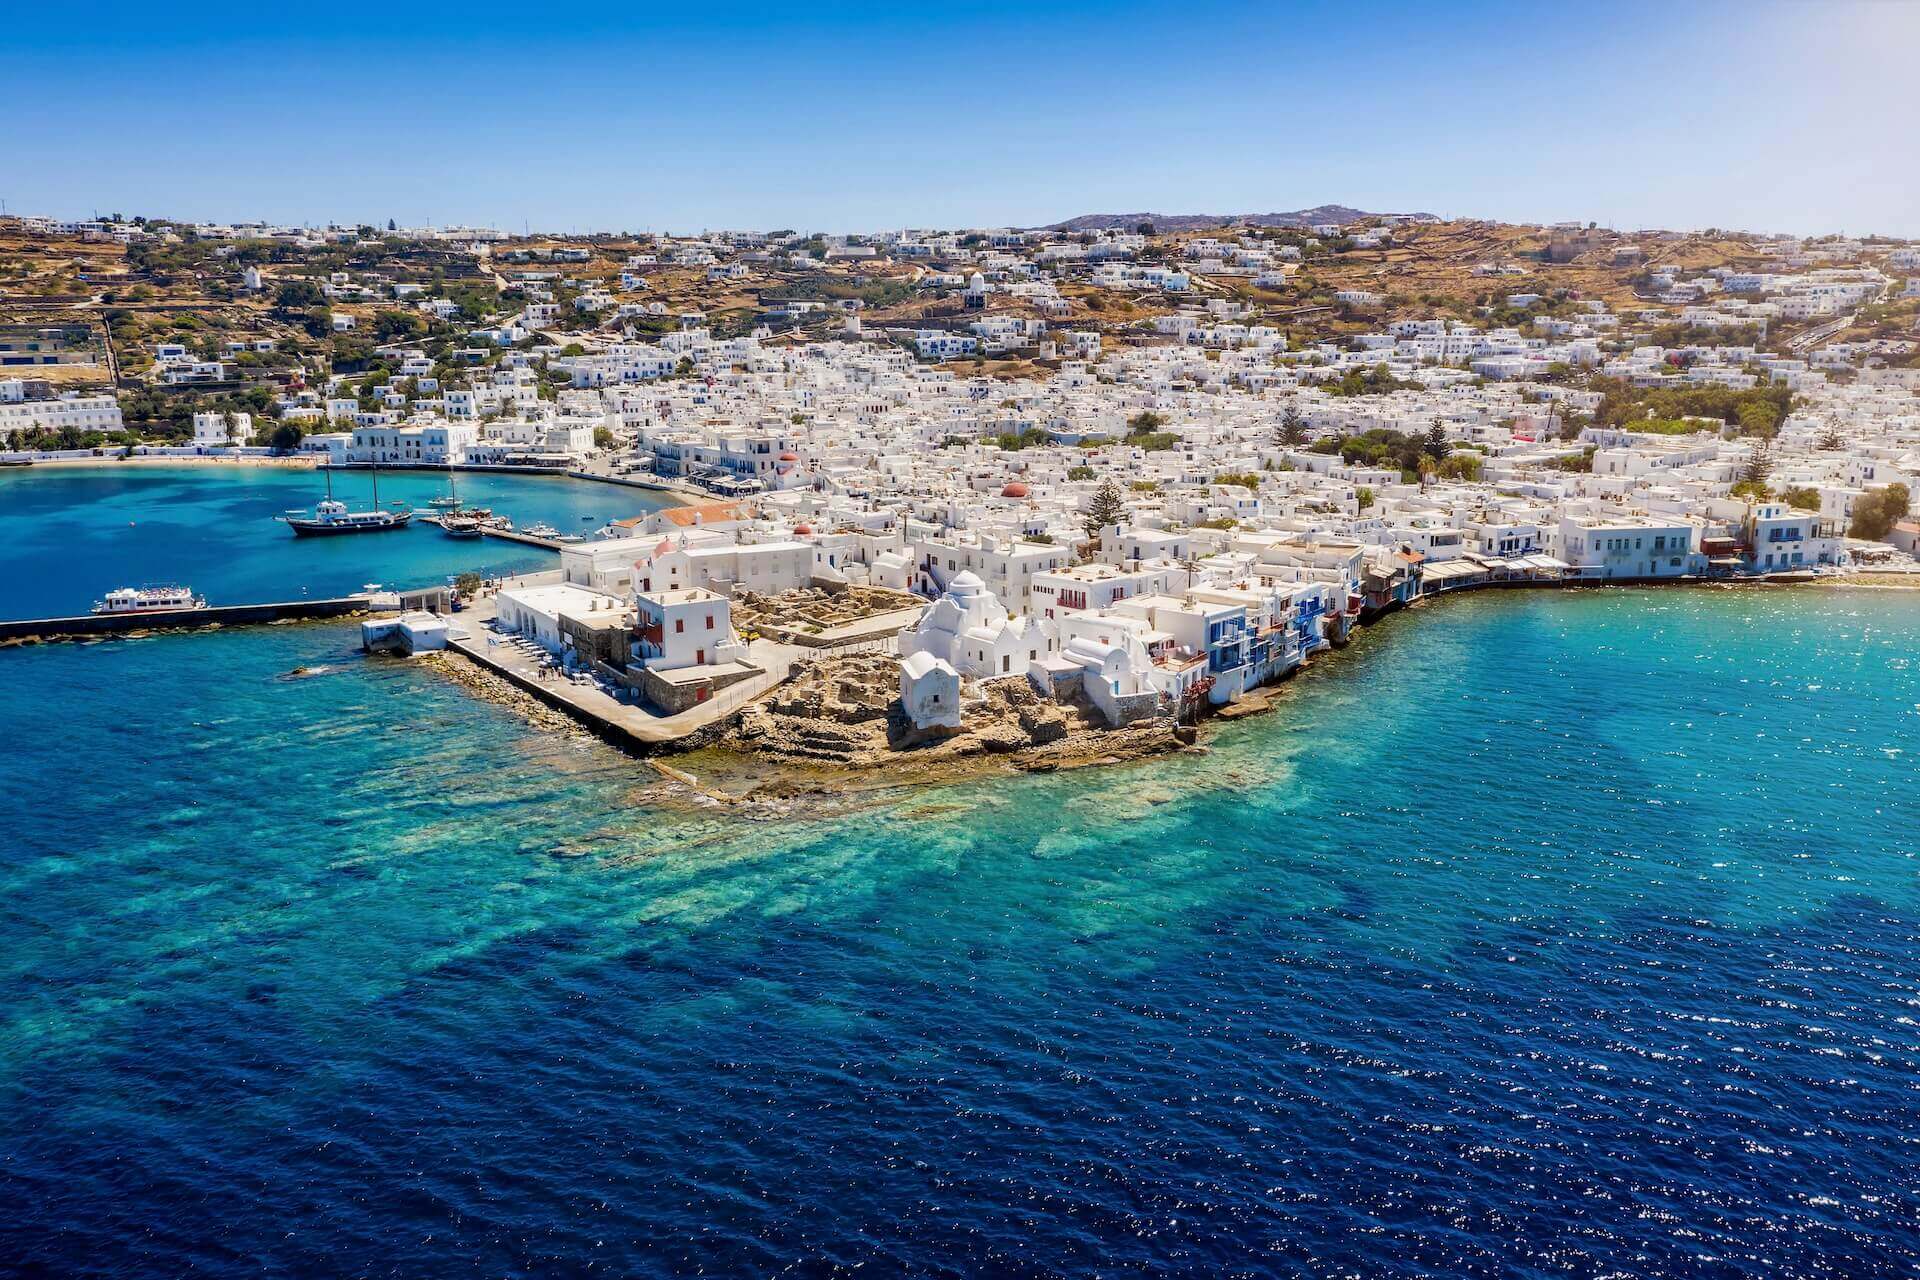 View of the Mykonos town